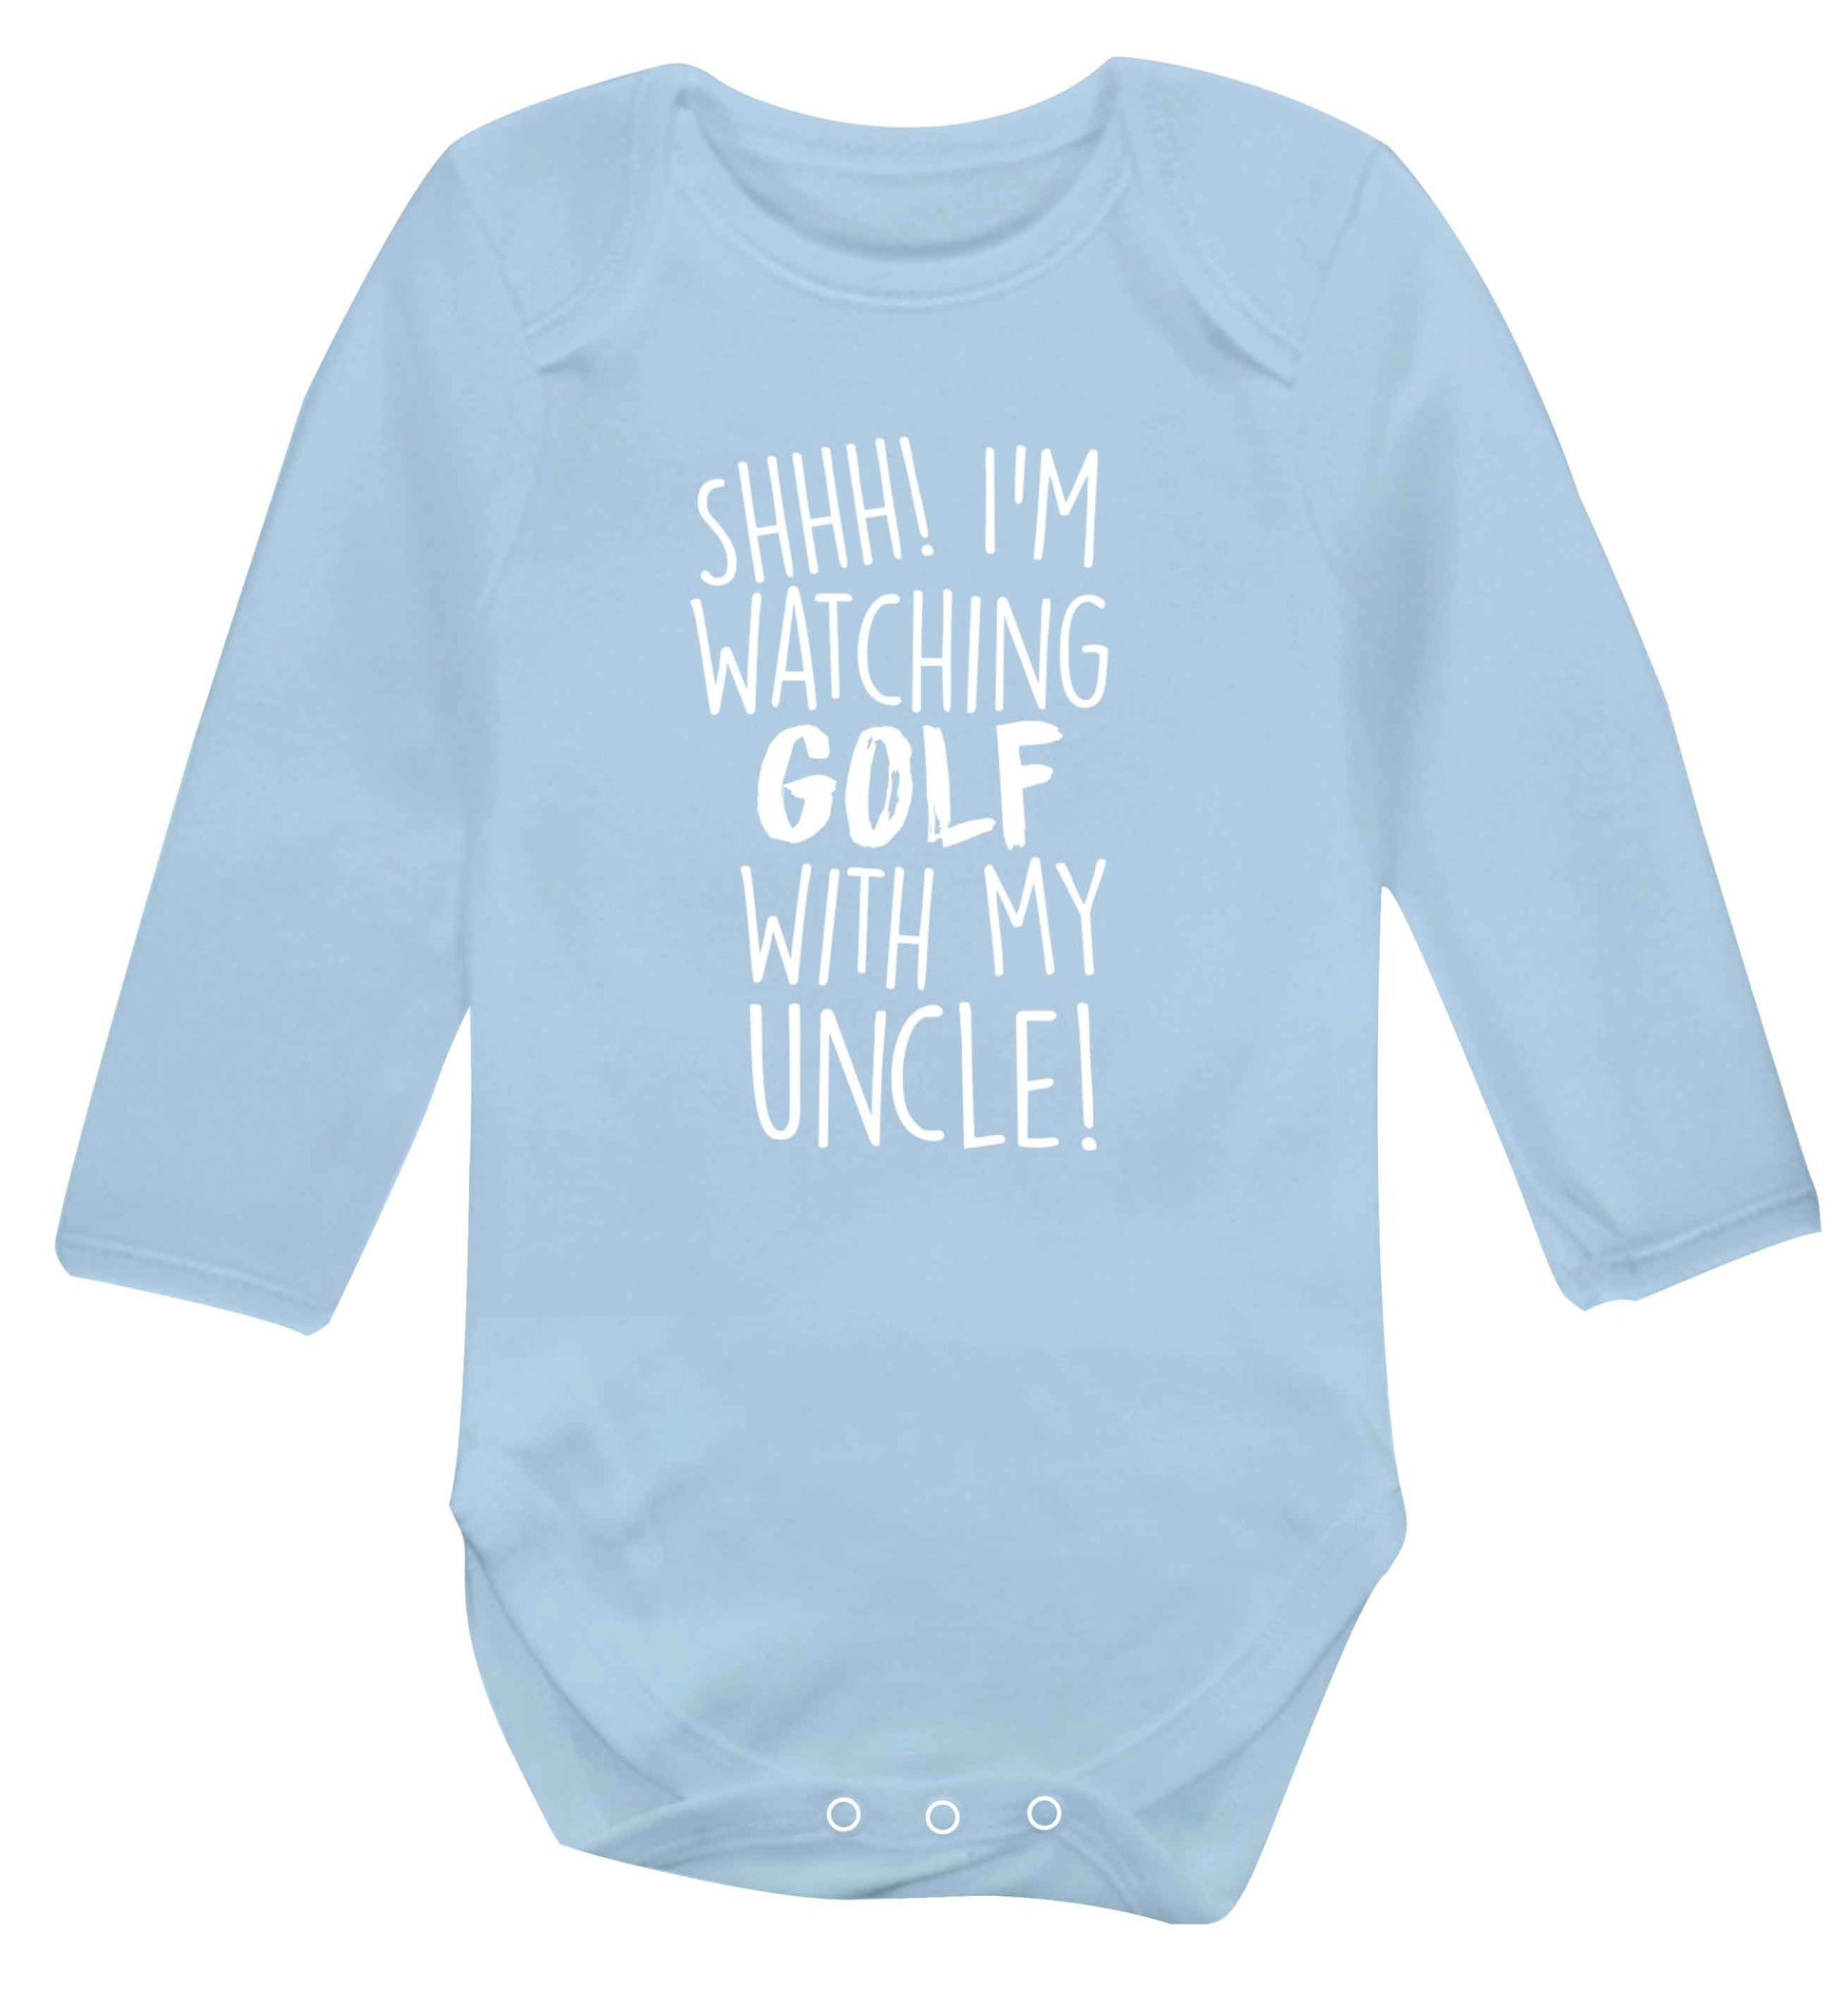 Shh I'm watching golf with my uncle Baby Vest long sleeved pale blue 6-12 months